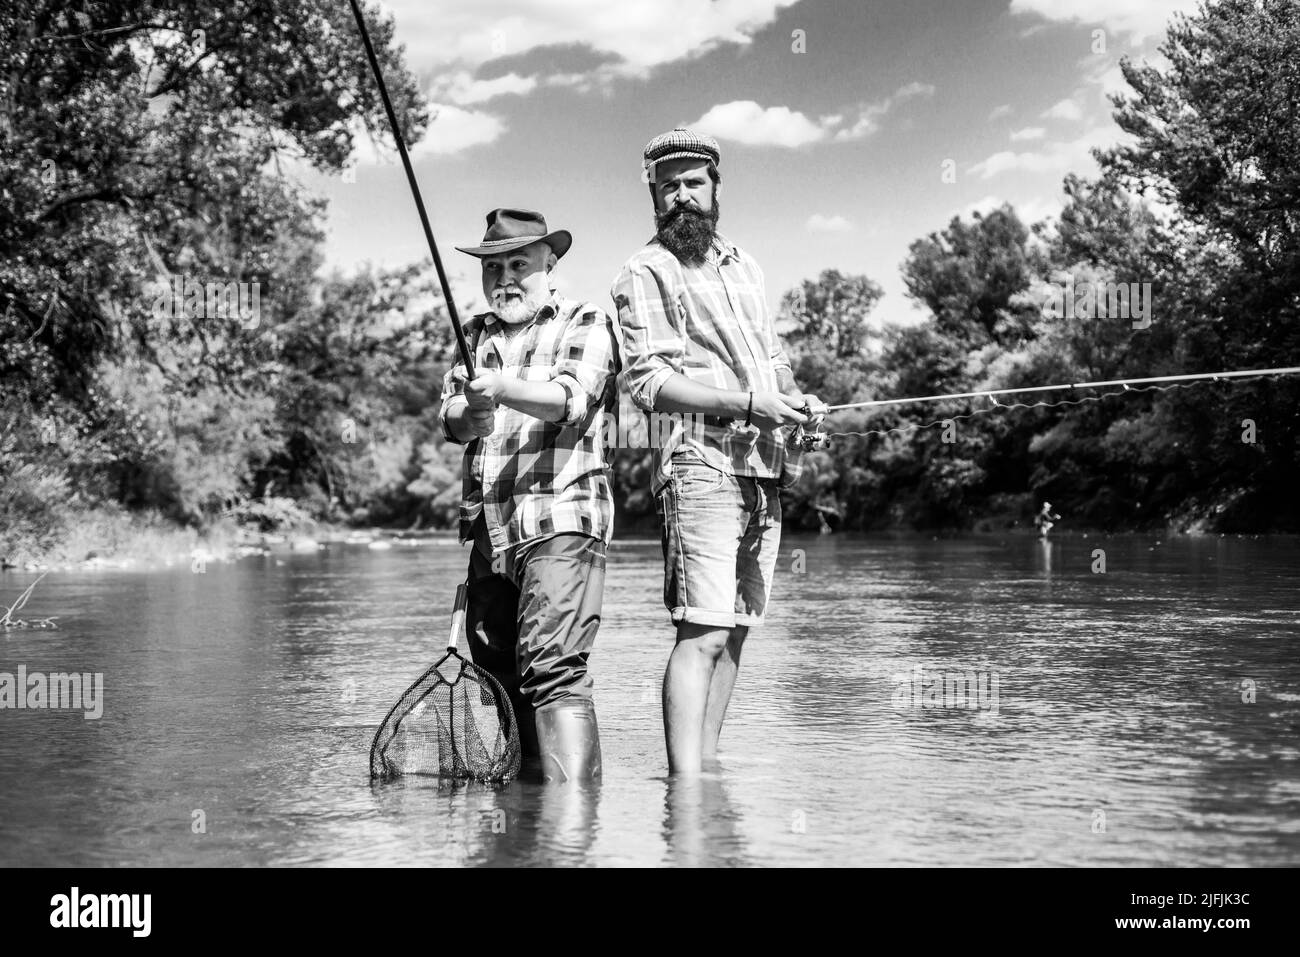 Fly fishing for trout. Father with son on the river enjoying fishing holding fishing rods Stock Photo